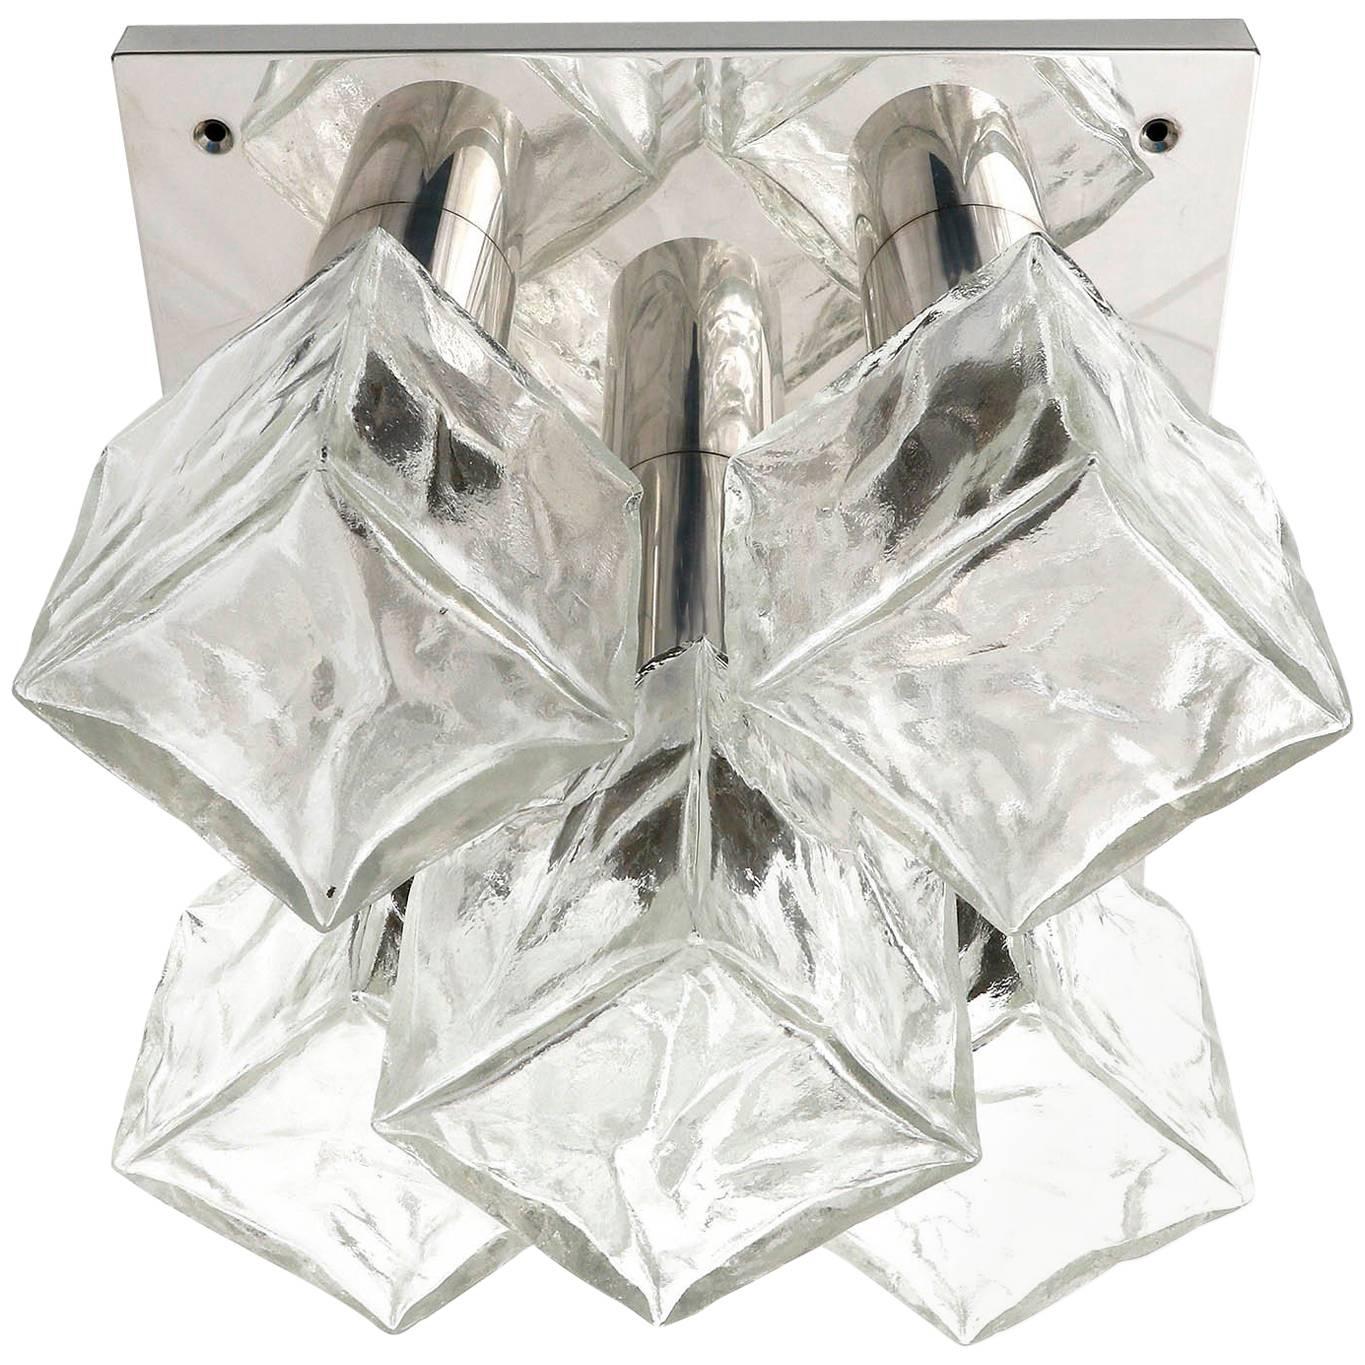 One of six modulare and square light fixtures model 'Cubus' (German 'Würfel') by Kalmar, Austria, manufactured in midcentury, circa 1970 (late 1960s or early 1970s).
They are made of polished stainless chromium steel and frosted cubic glasses. Each